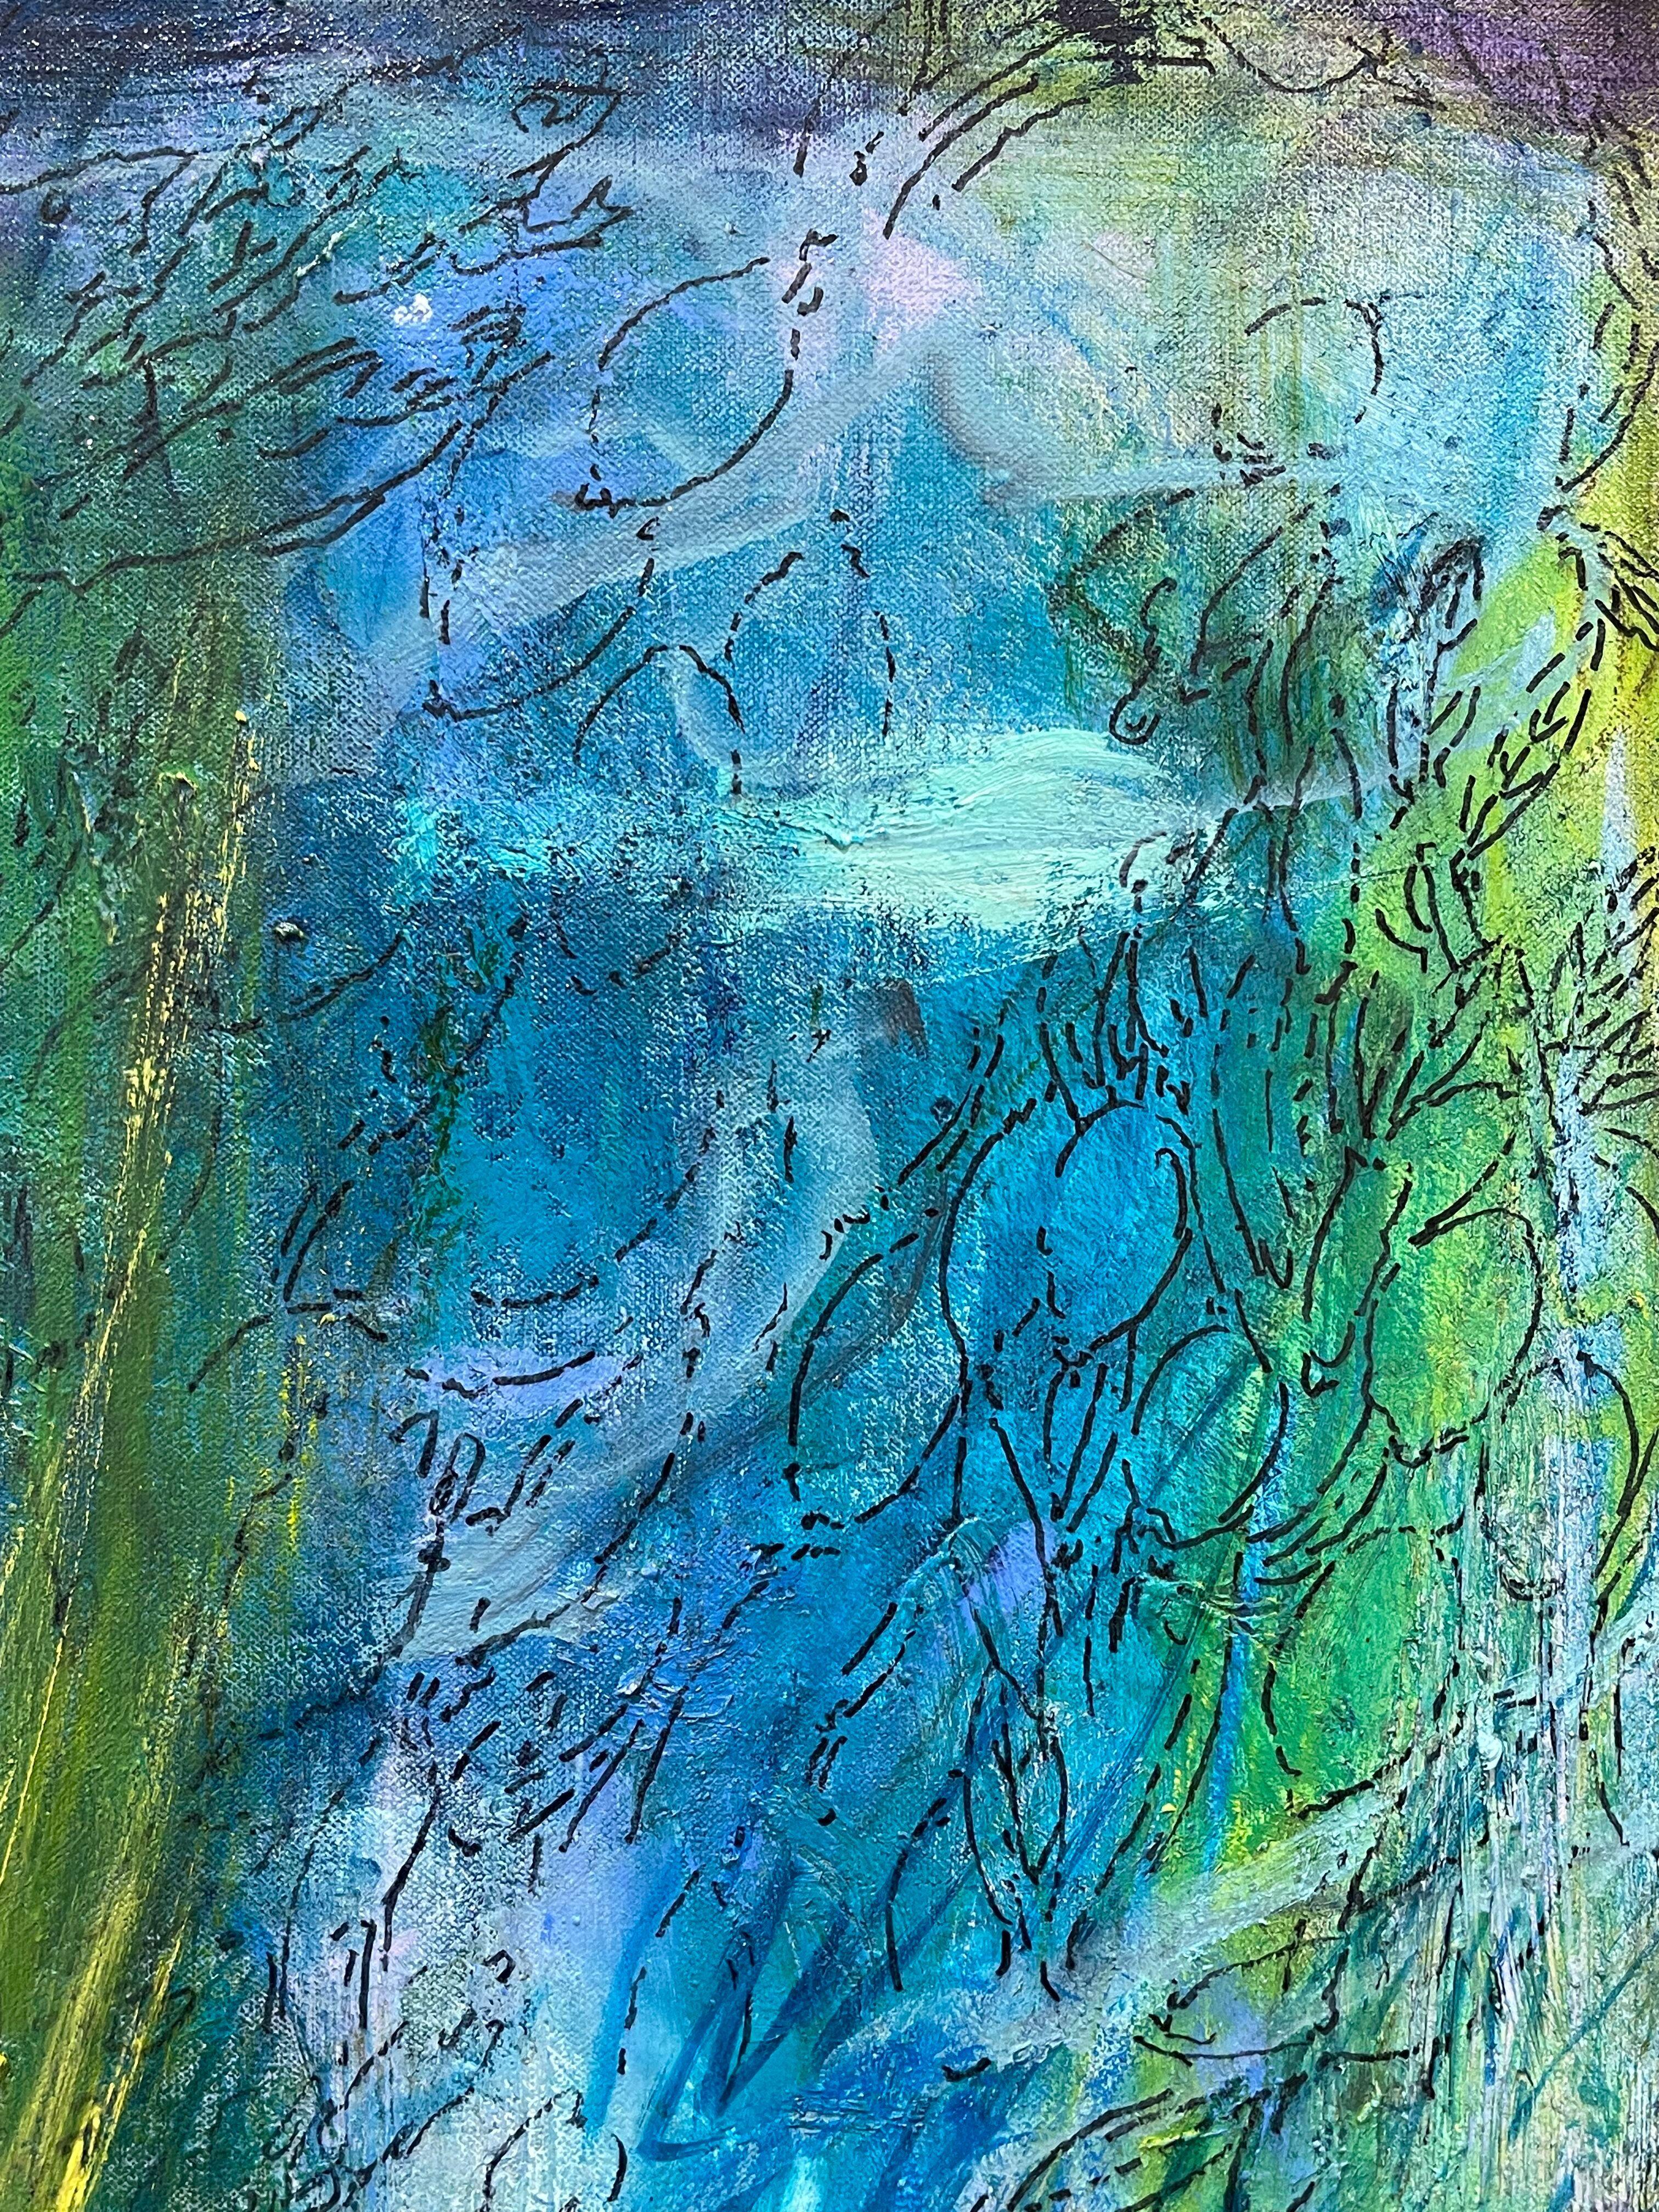 Wild Rice - Blue Abstract Painting by Margaret Ross Tolbert